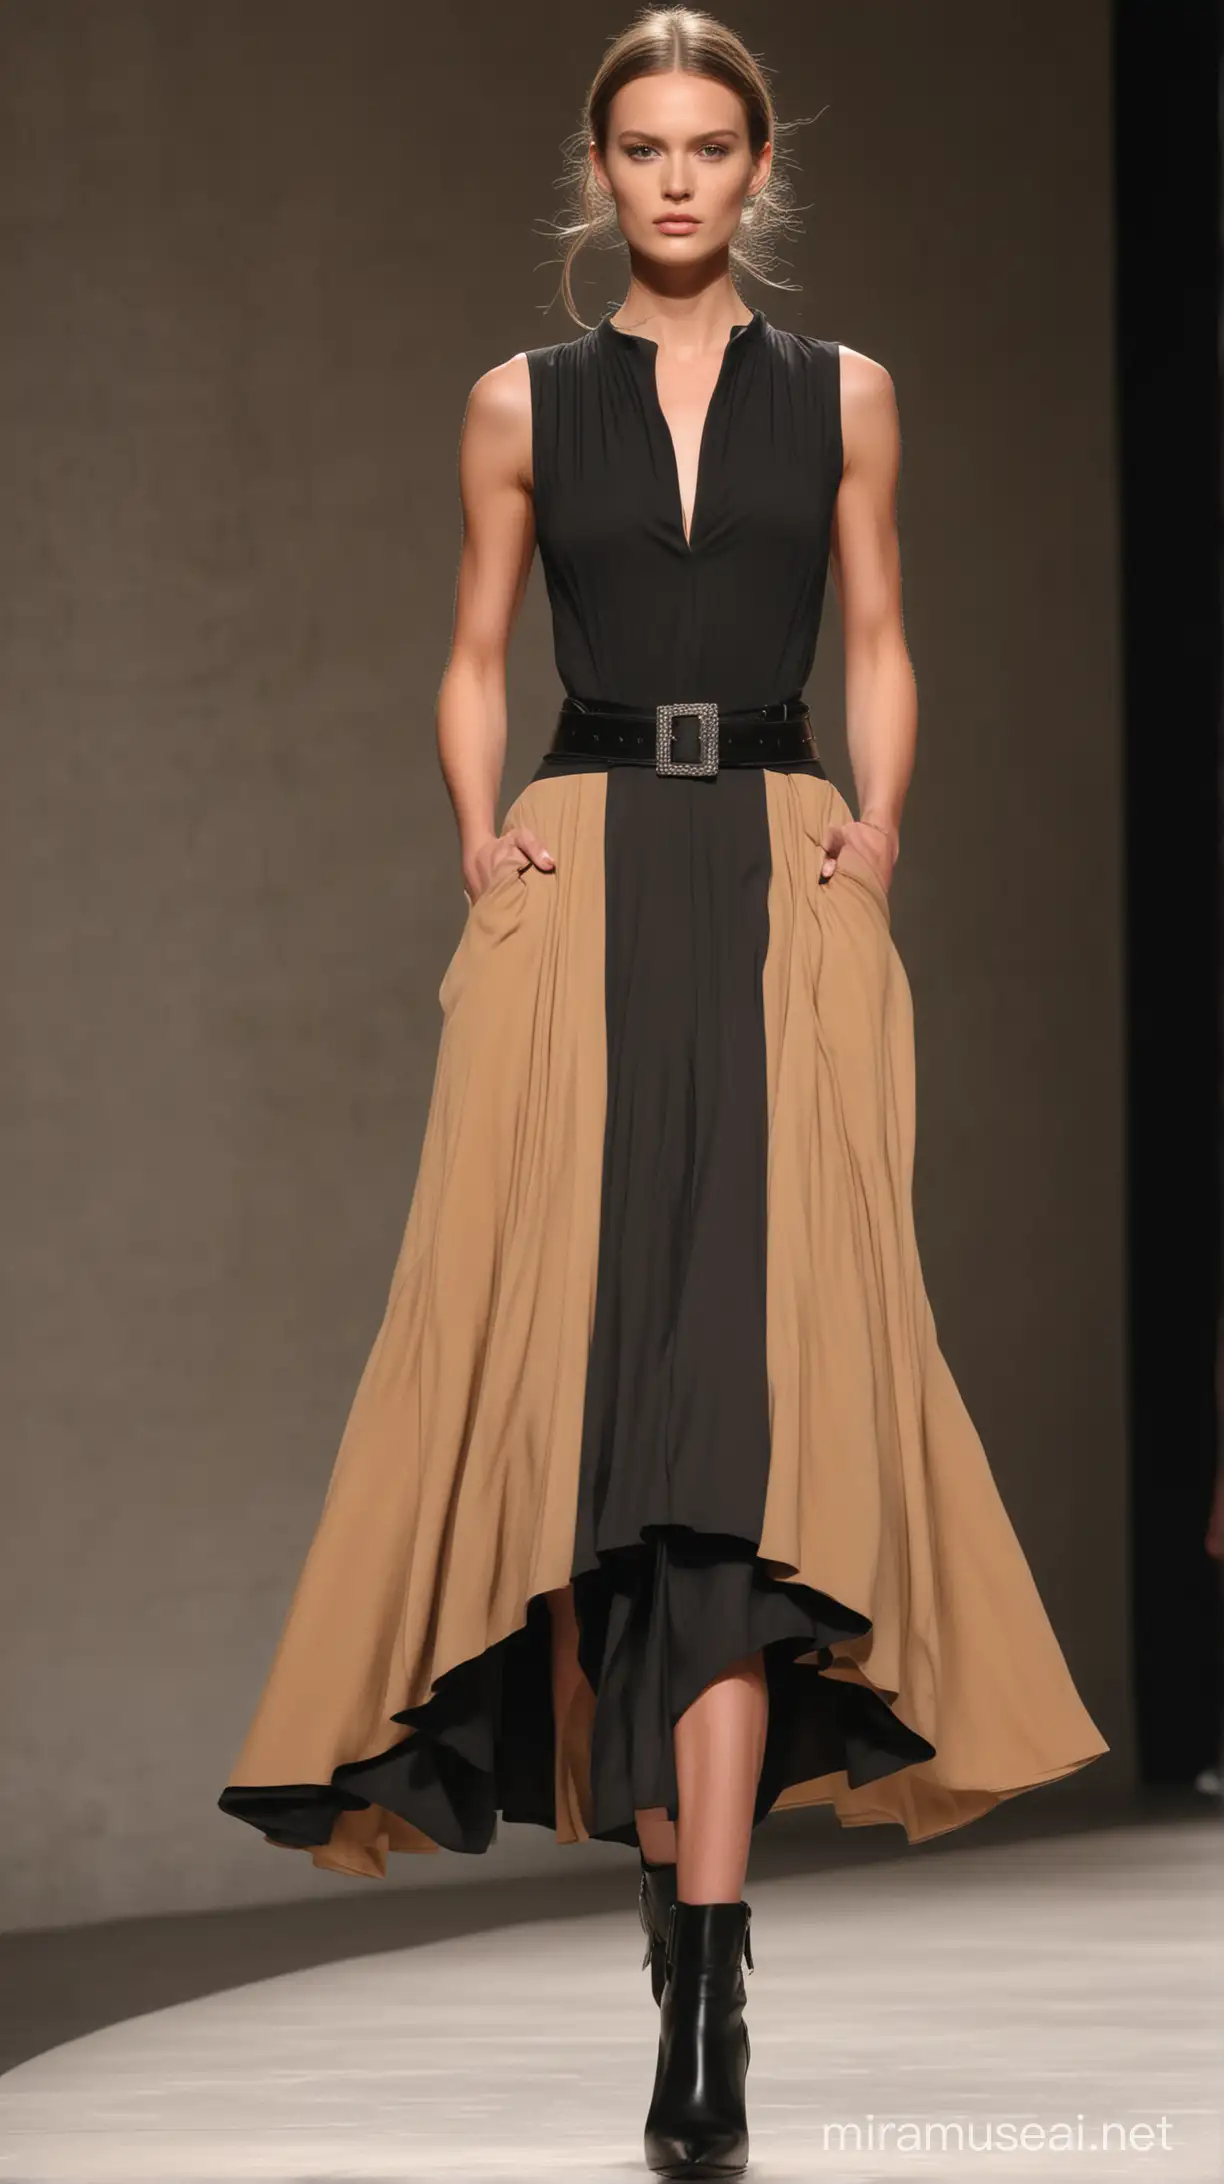 Stunning supermodel runway motion for Montelago brand, front angle, wearing  sleeveless dress, very long flowy, 2 colors(camel and black charcoal) cupro fabric skirt, hands in the pockets , bold belt, hyper-realistic, Alexander McQueen style